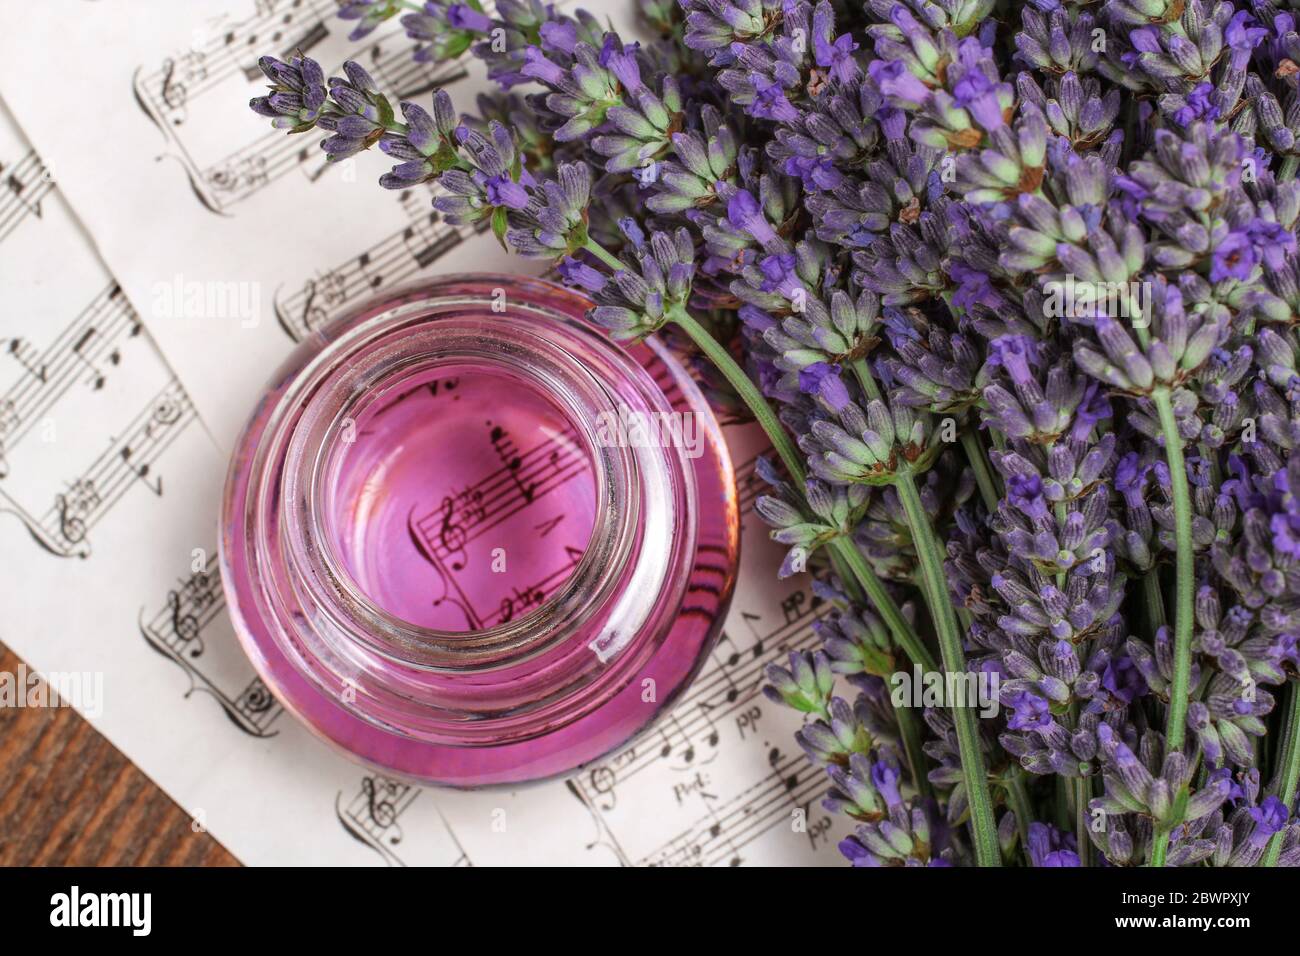 Flask with lavender oil Stock Photo